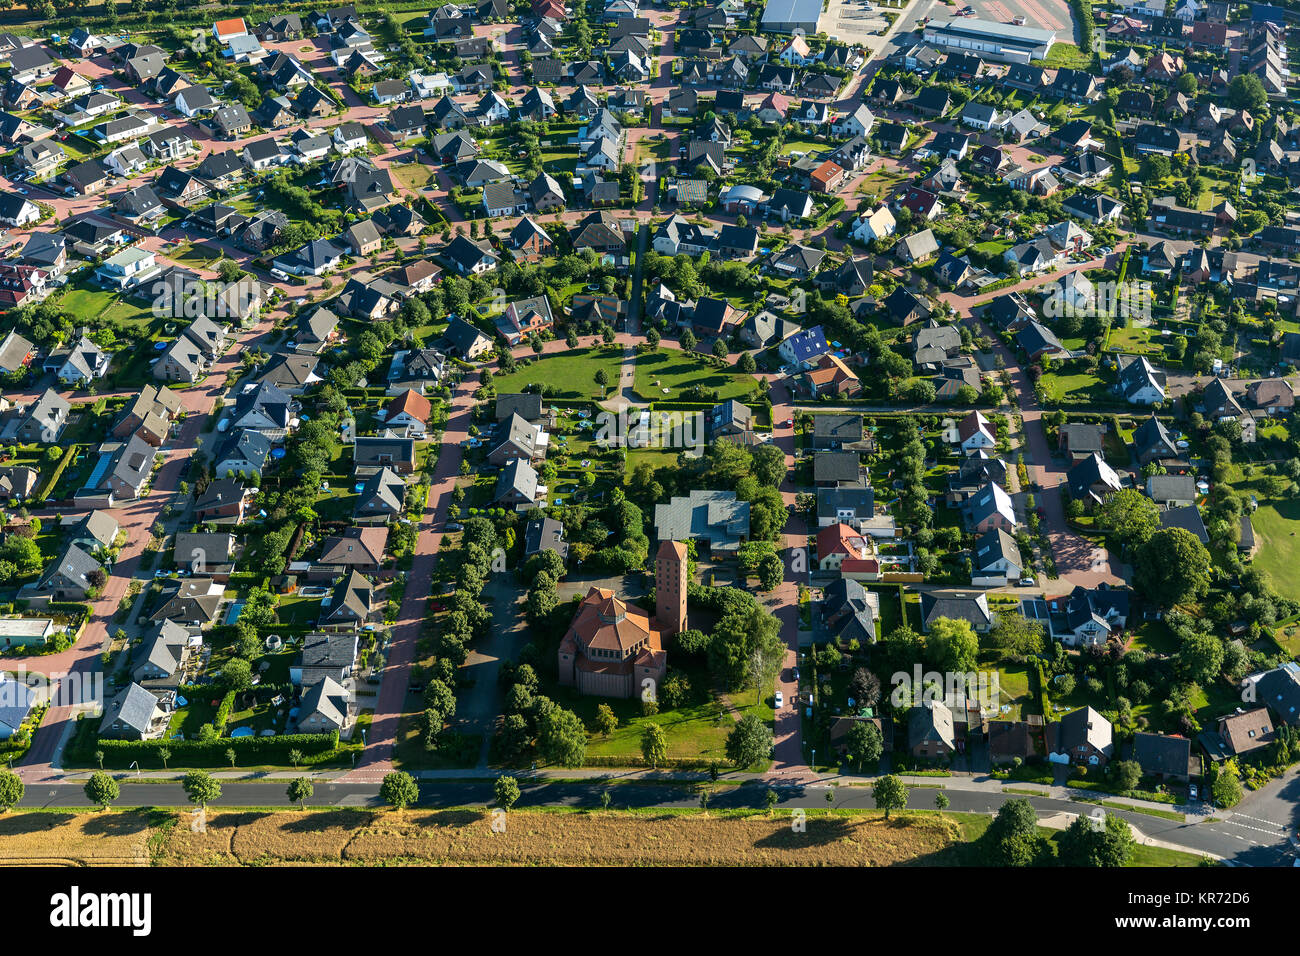 Horseshoe plan, settlement with a social focus, ownership, home ownership, Einfamilienhäuaser, semi-detached houses, children's playground, settlement Stock Photo